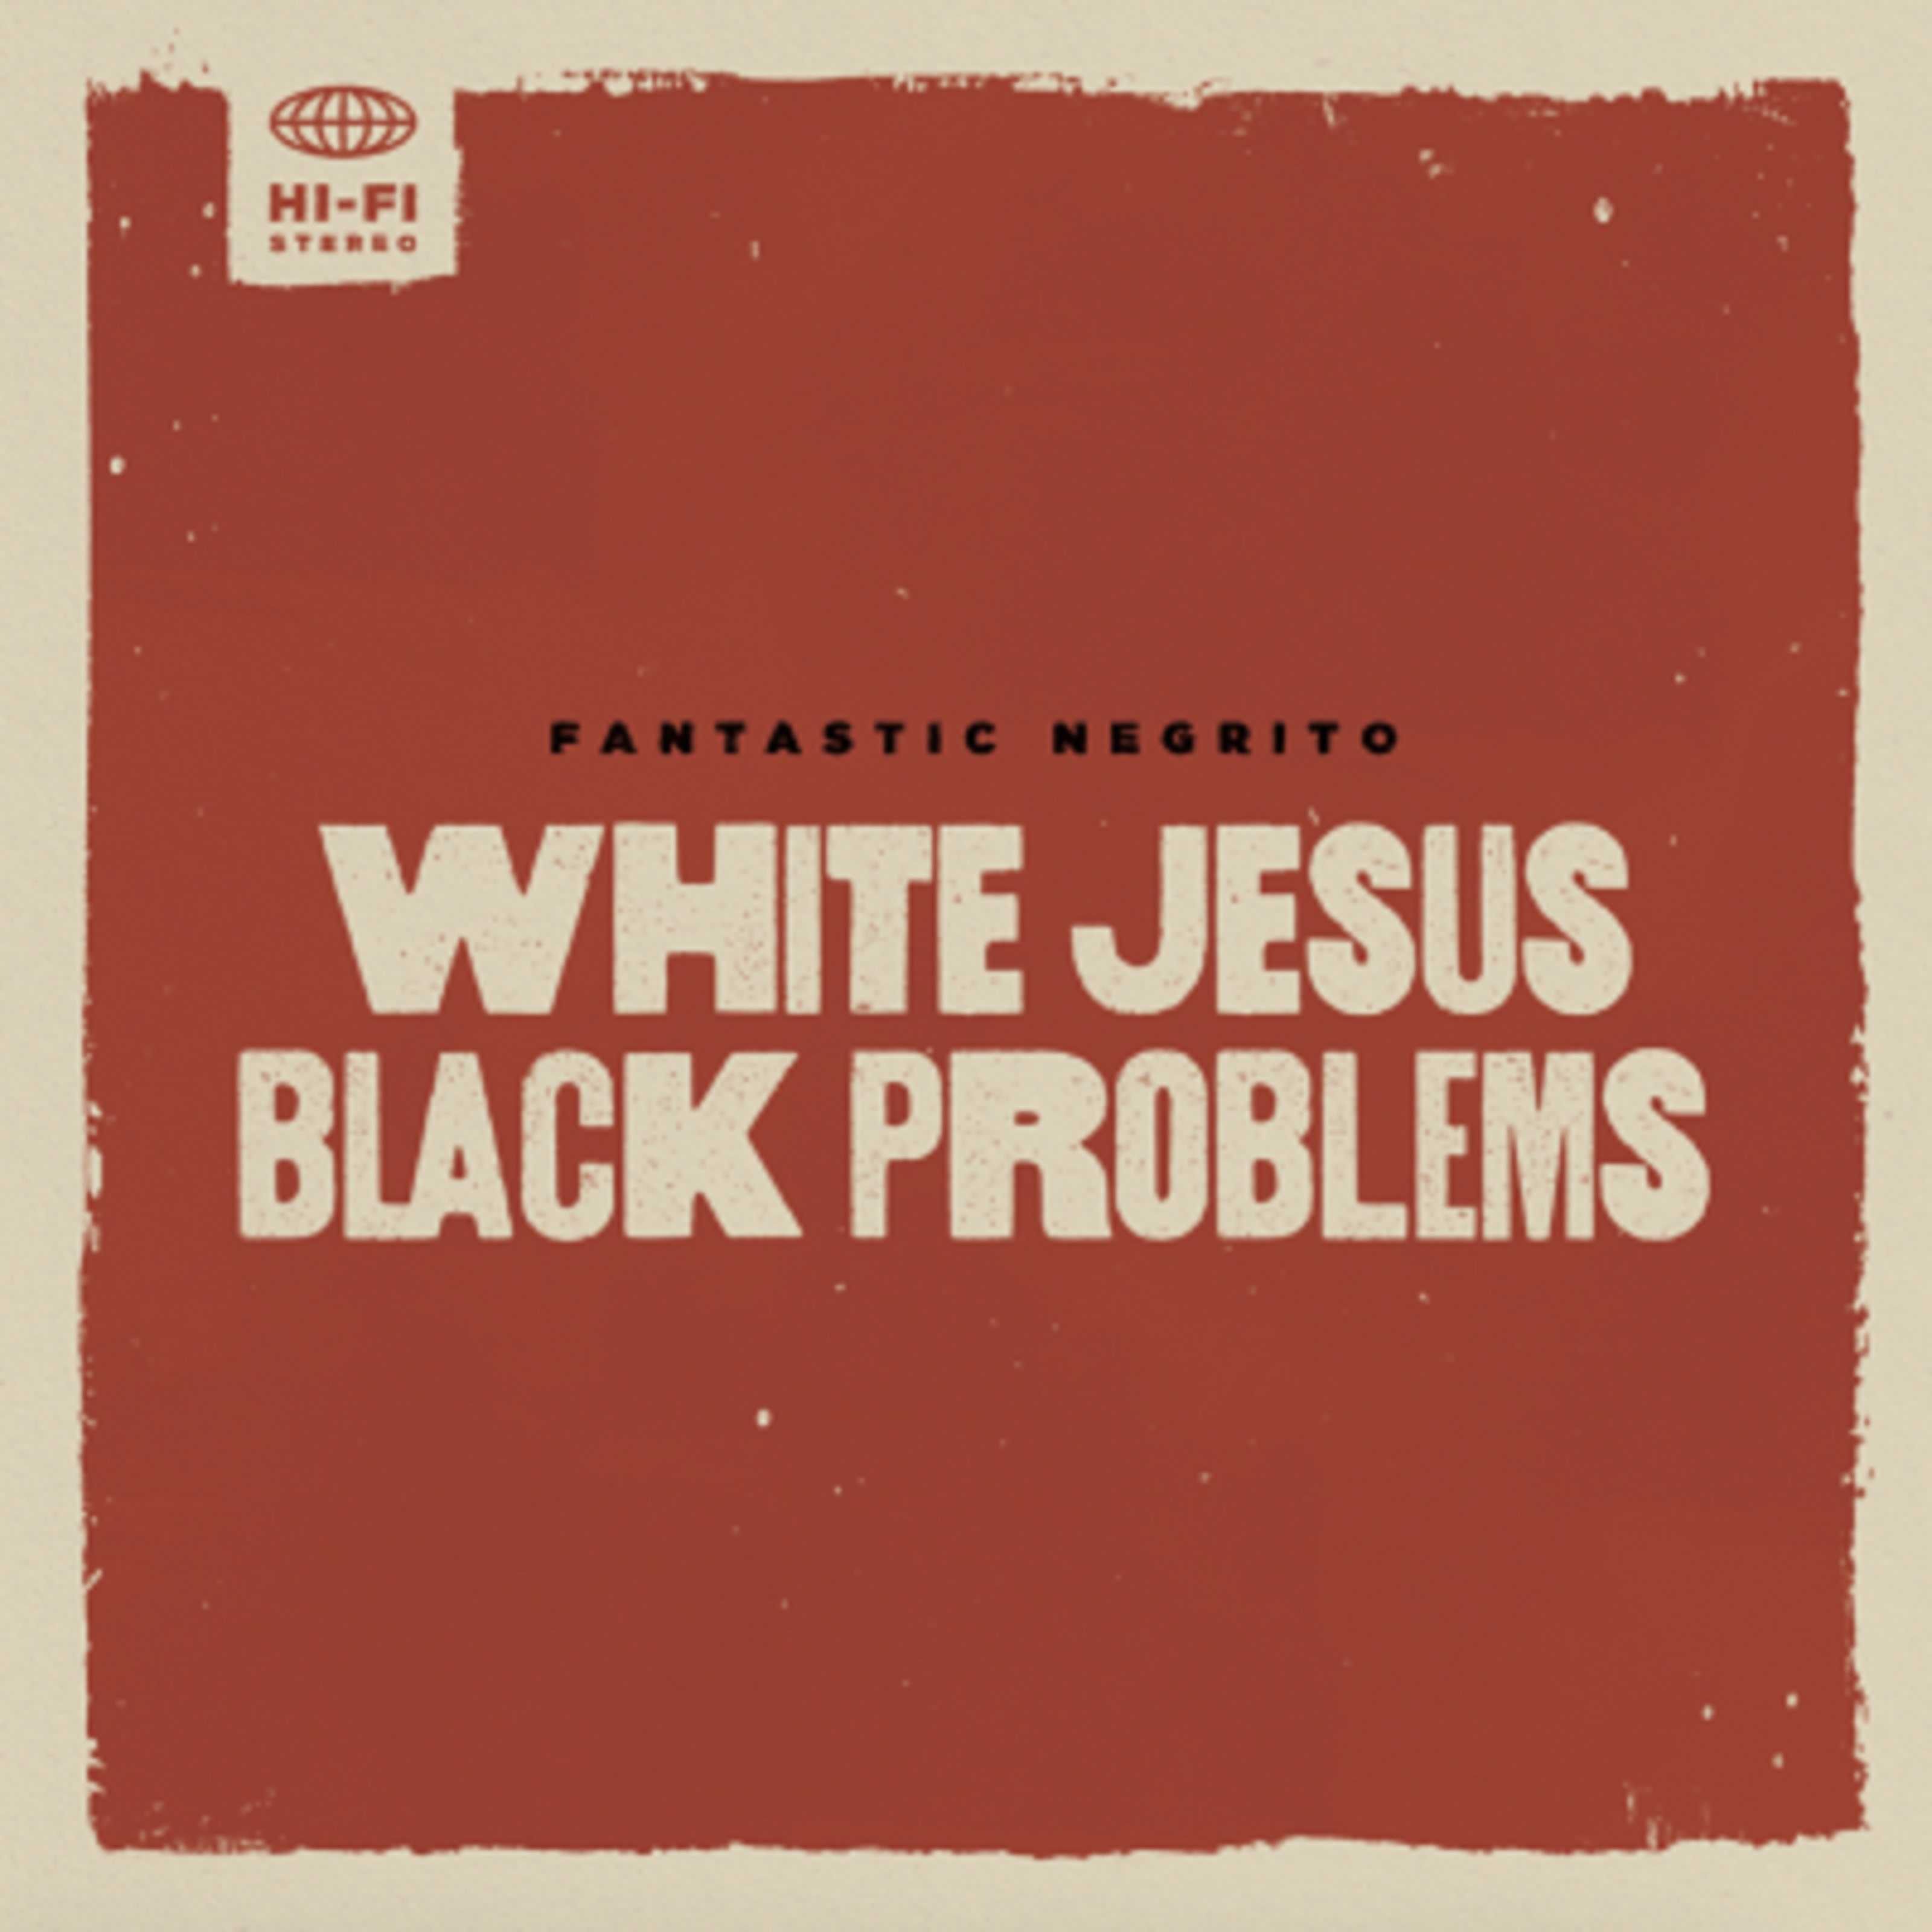 Fantastic Negrito’s most ambitious work, White Jesus Black Problems, OUT TODAY